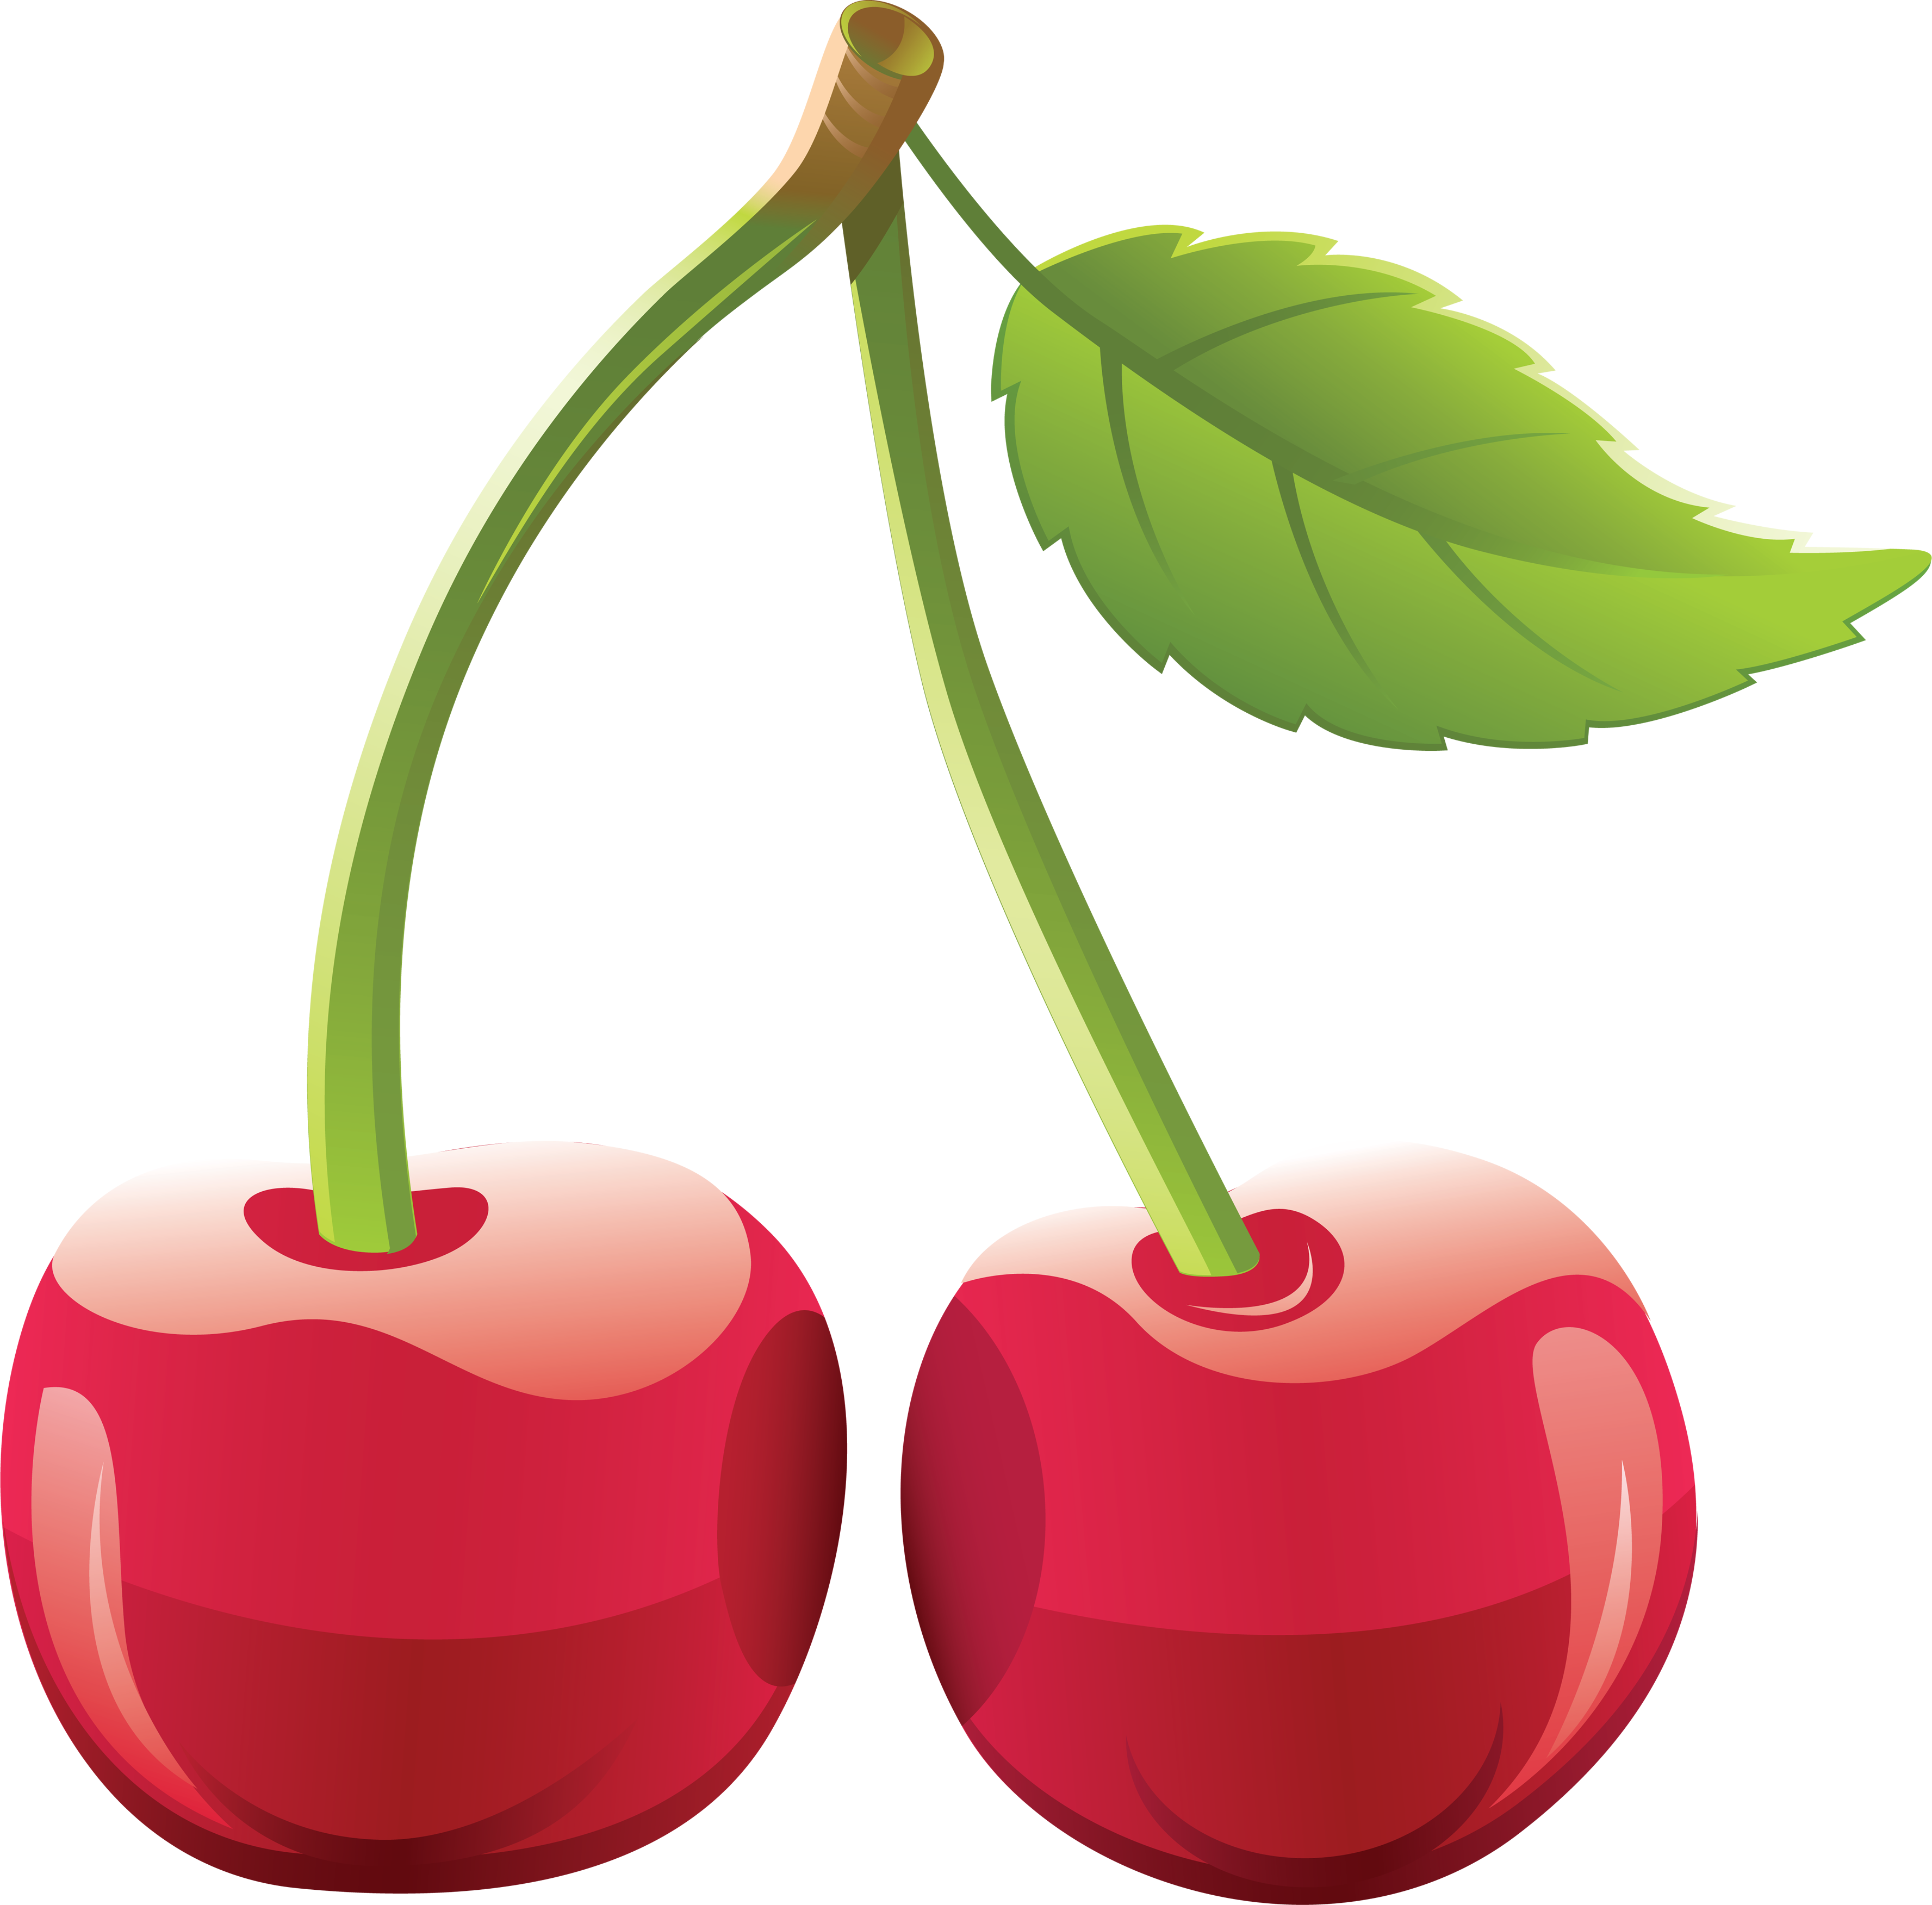 Cherry Clip art - cherry PNG image png download - 3553*3504 - Free ...